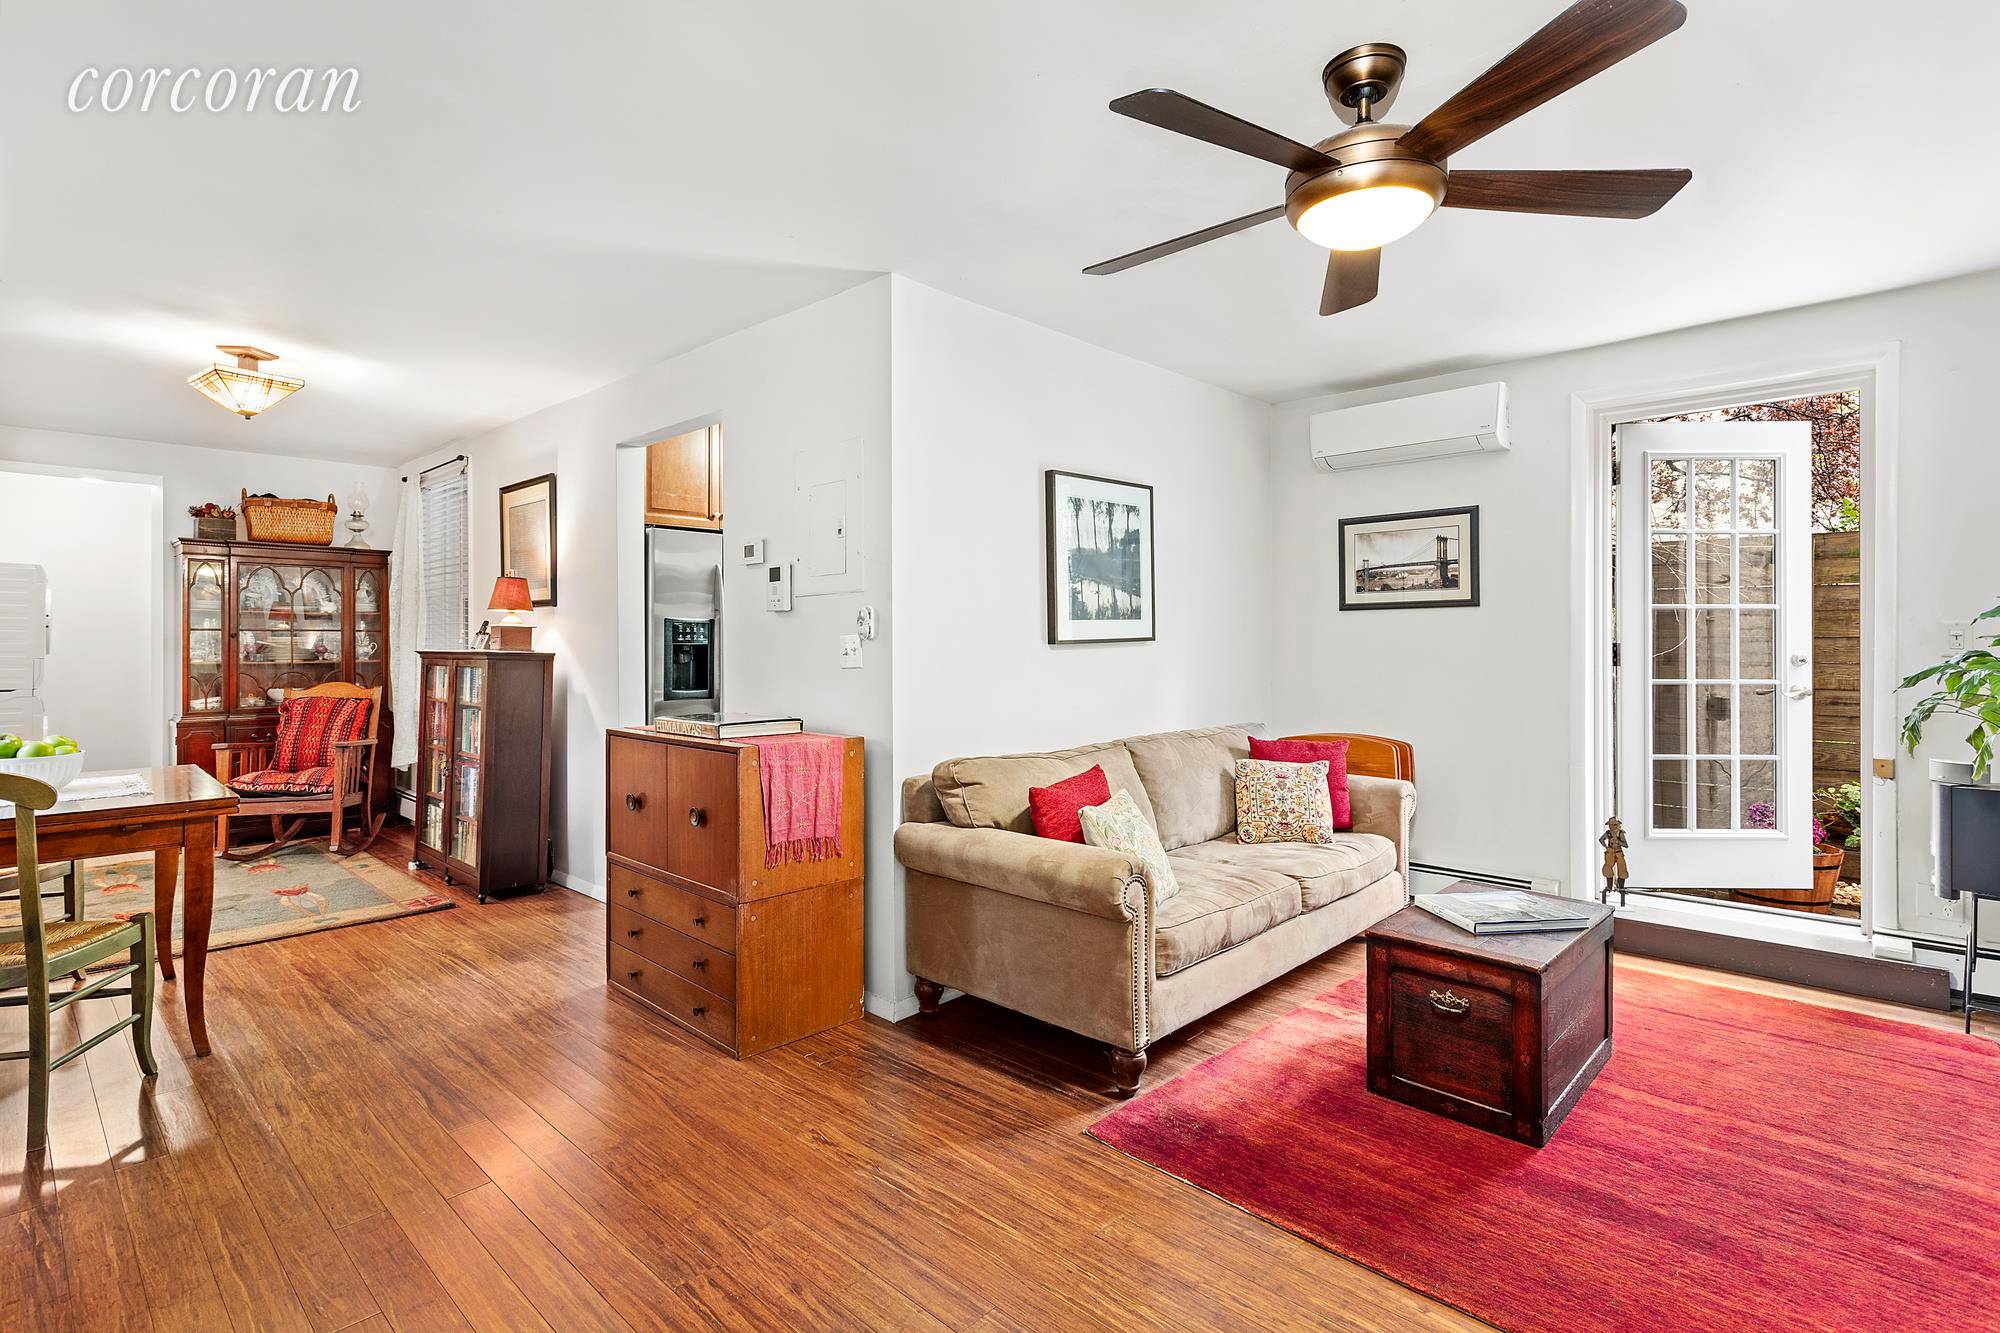 Motivated Seller offers this inviting one bedroom, one bath home situated on a beautiful tree lined street in charming Carroll Gardens.